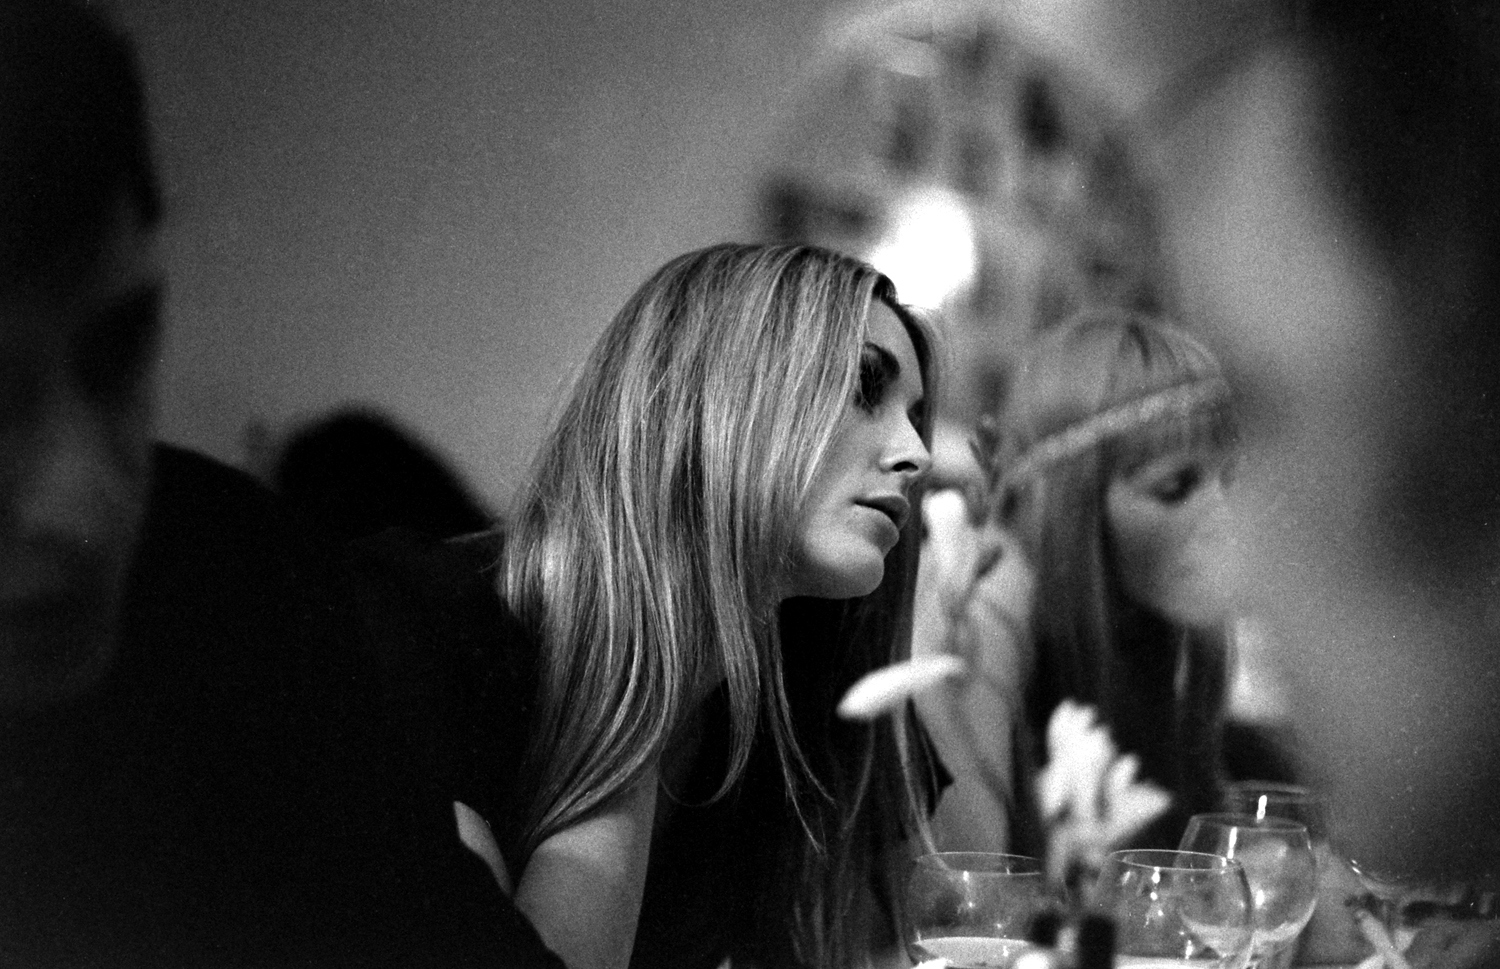 Sharon Tate and friends, London, 1968.